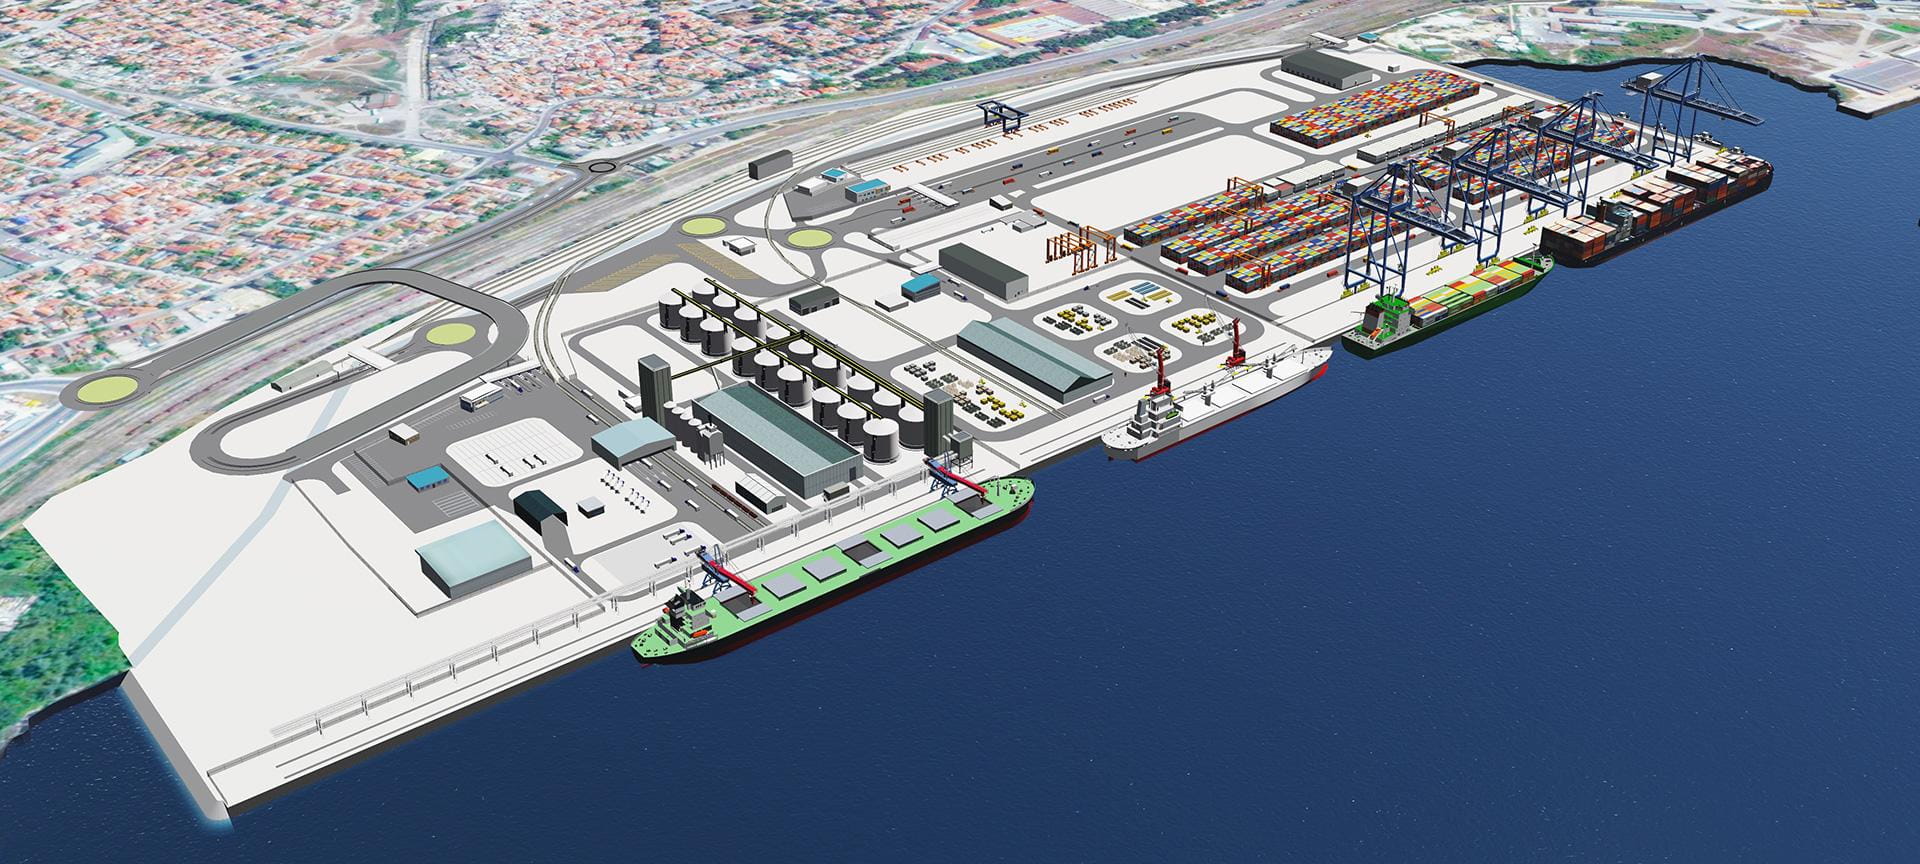 Animated view of a port master plan